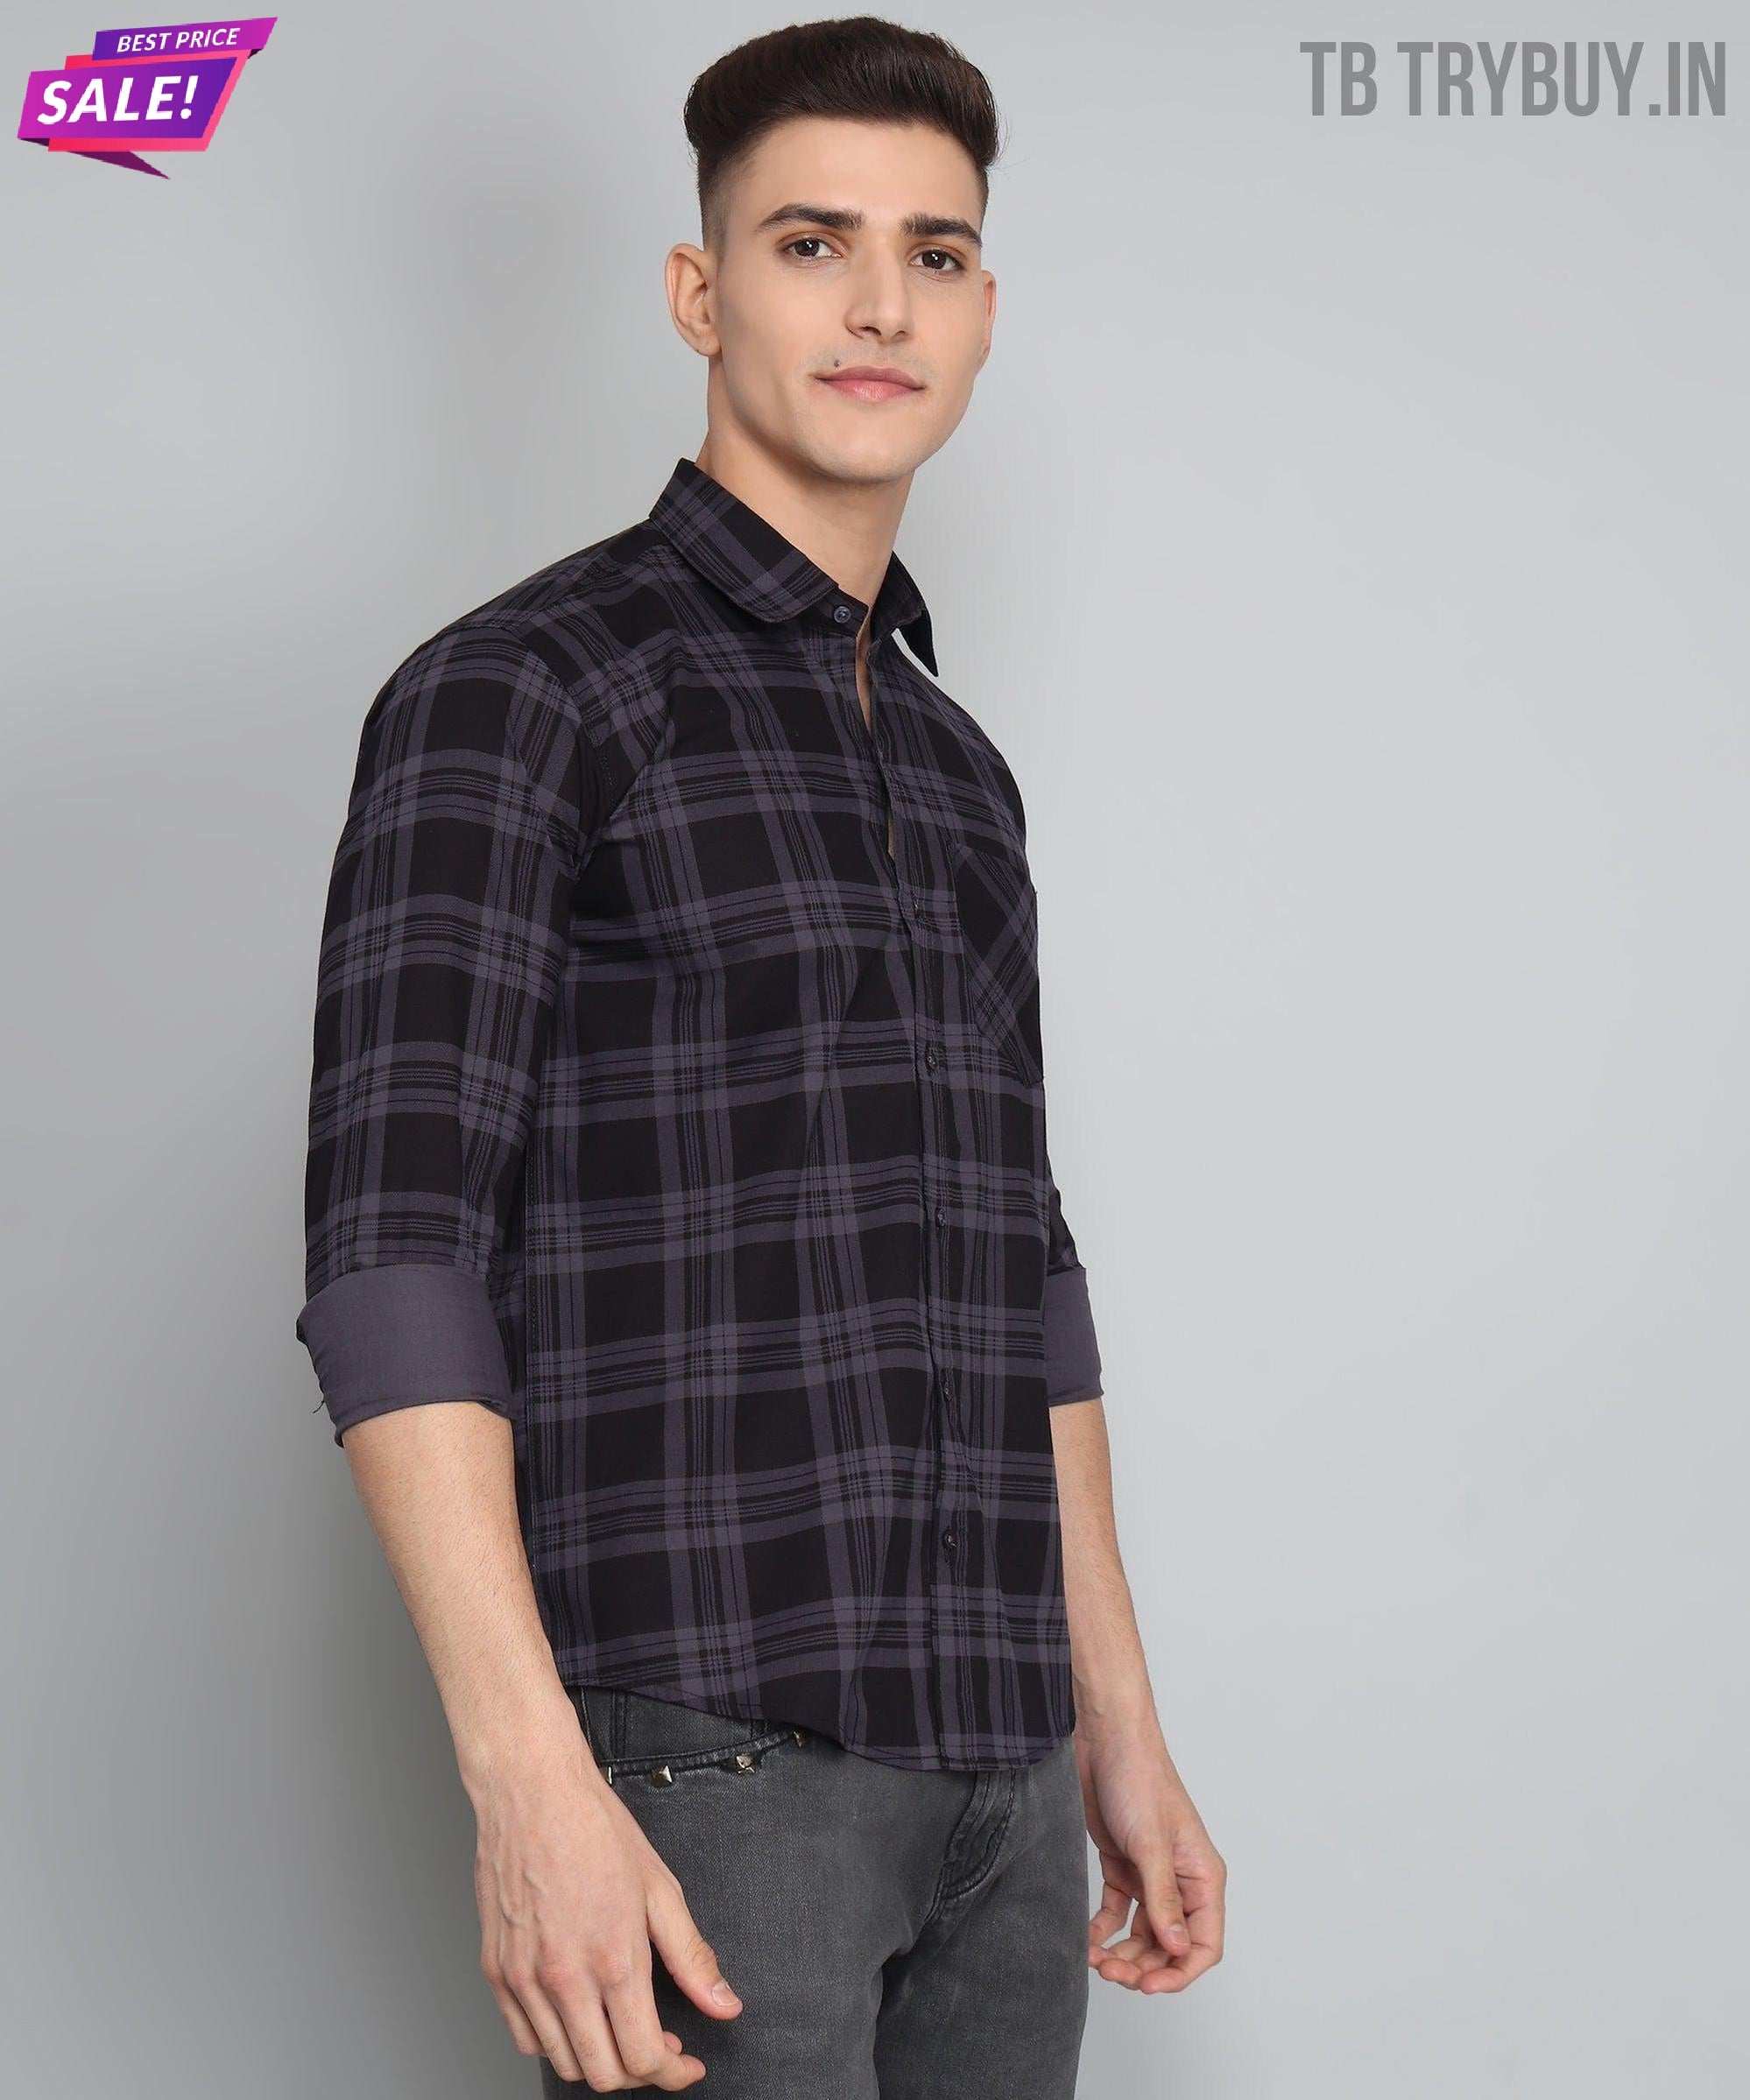 Exclusive TryBuy Premium Black Grey Check Cotton Casual Shirt for Men